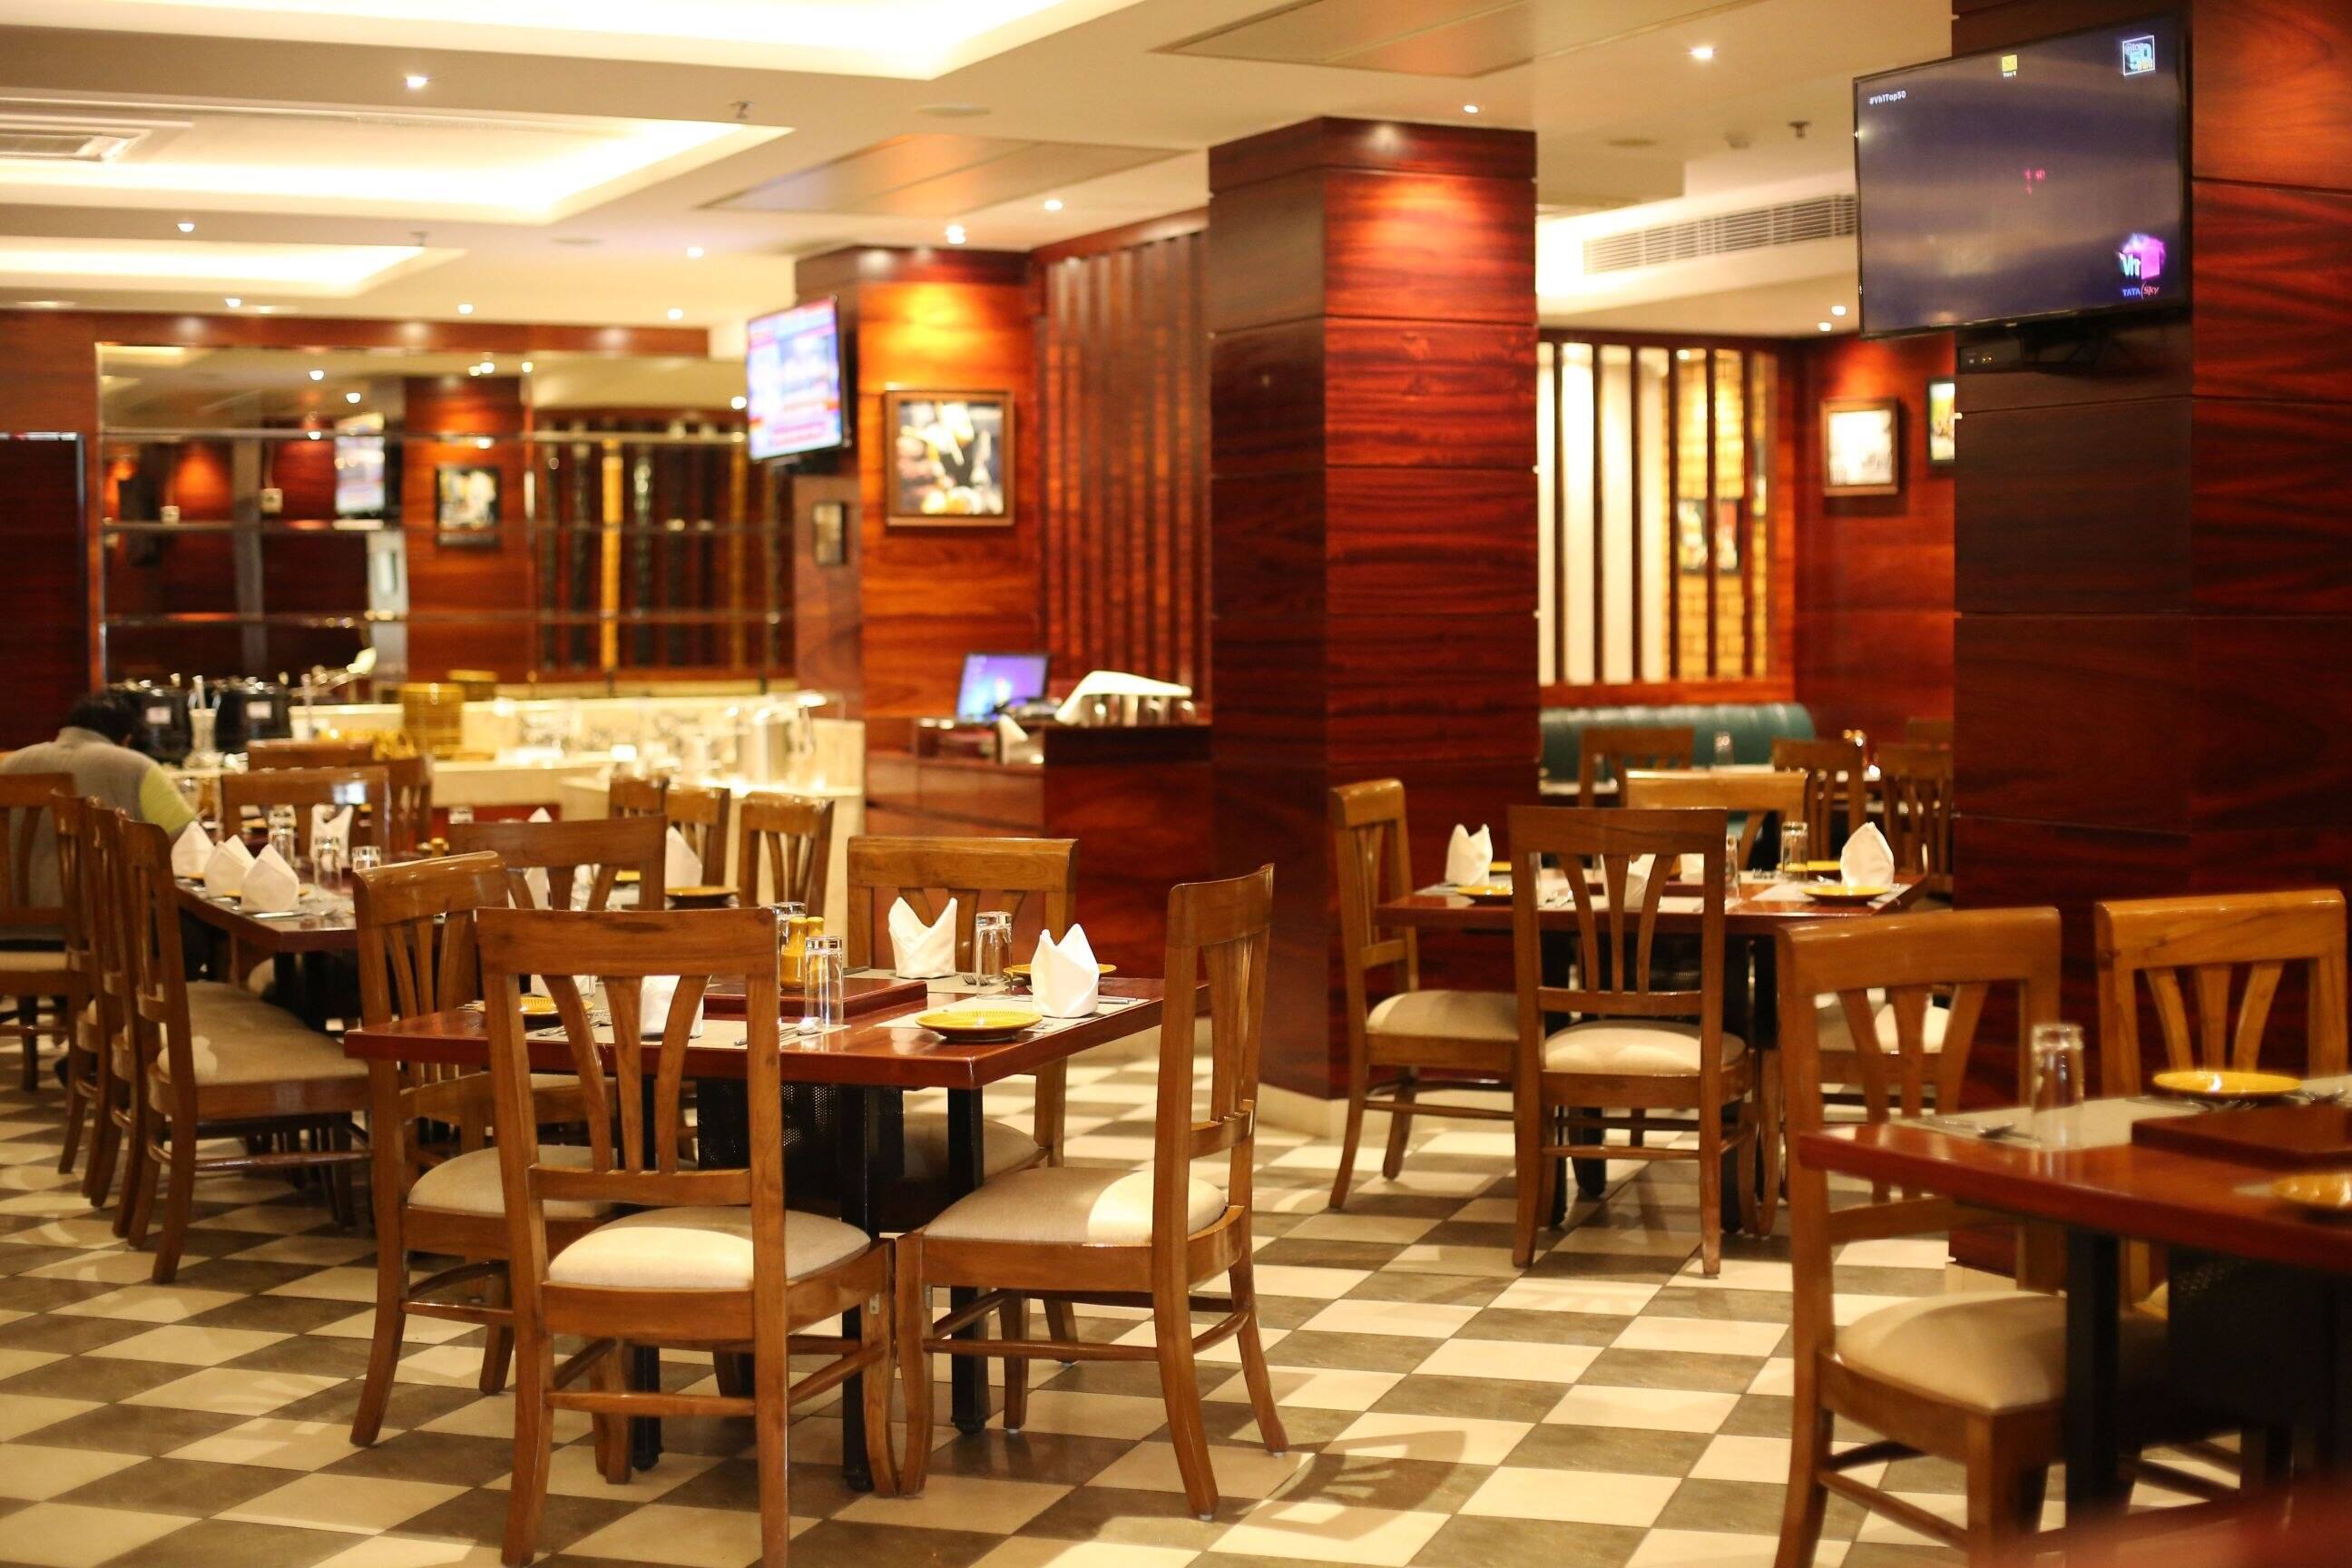 The Stonefire Barbeque Sector 62 Noida